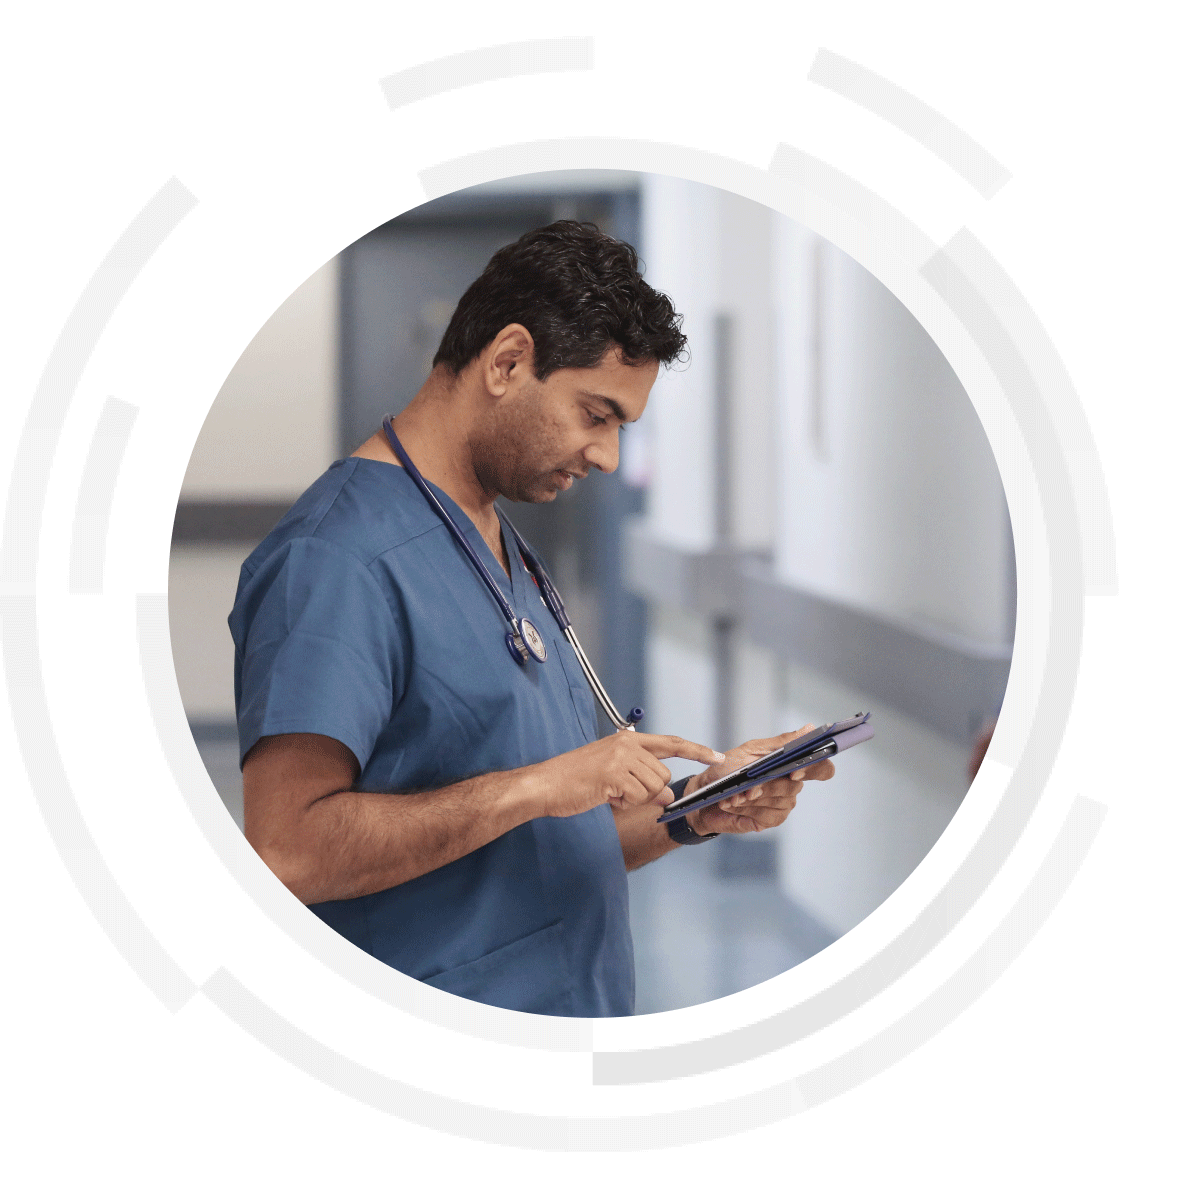 Male clinician using a tablet in a hospital hallway.